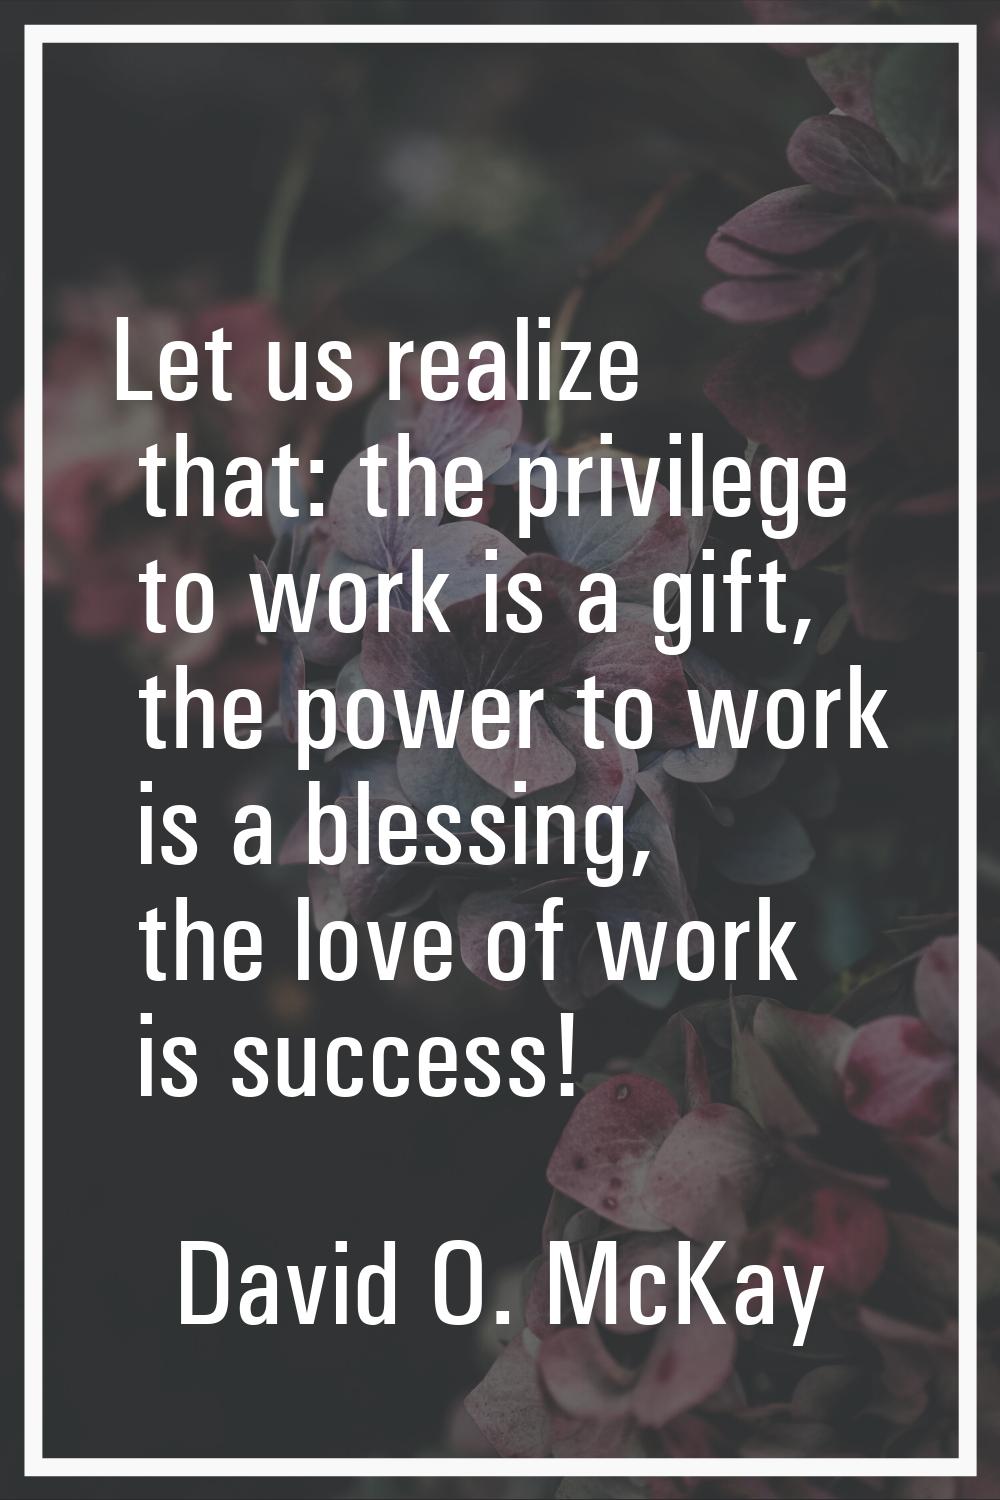 Let us realize that: the privilege to work is a gift, the power to work is a blessing, the love of 